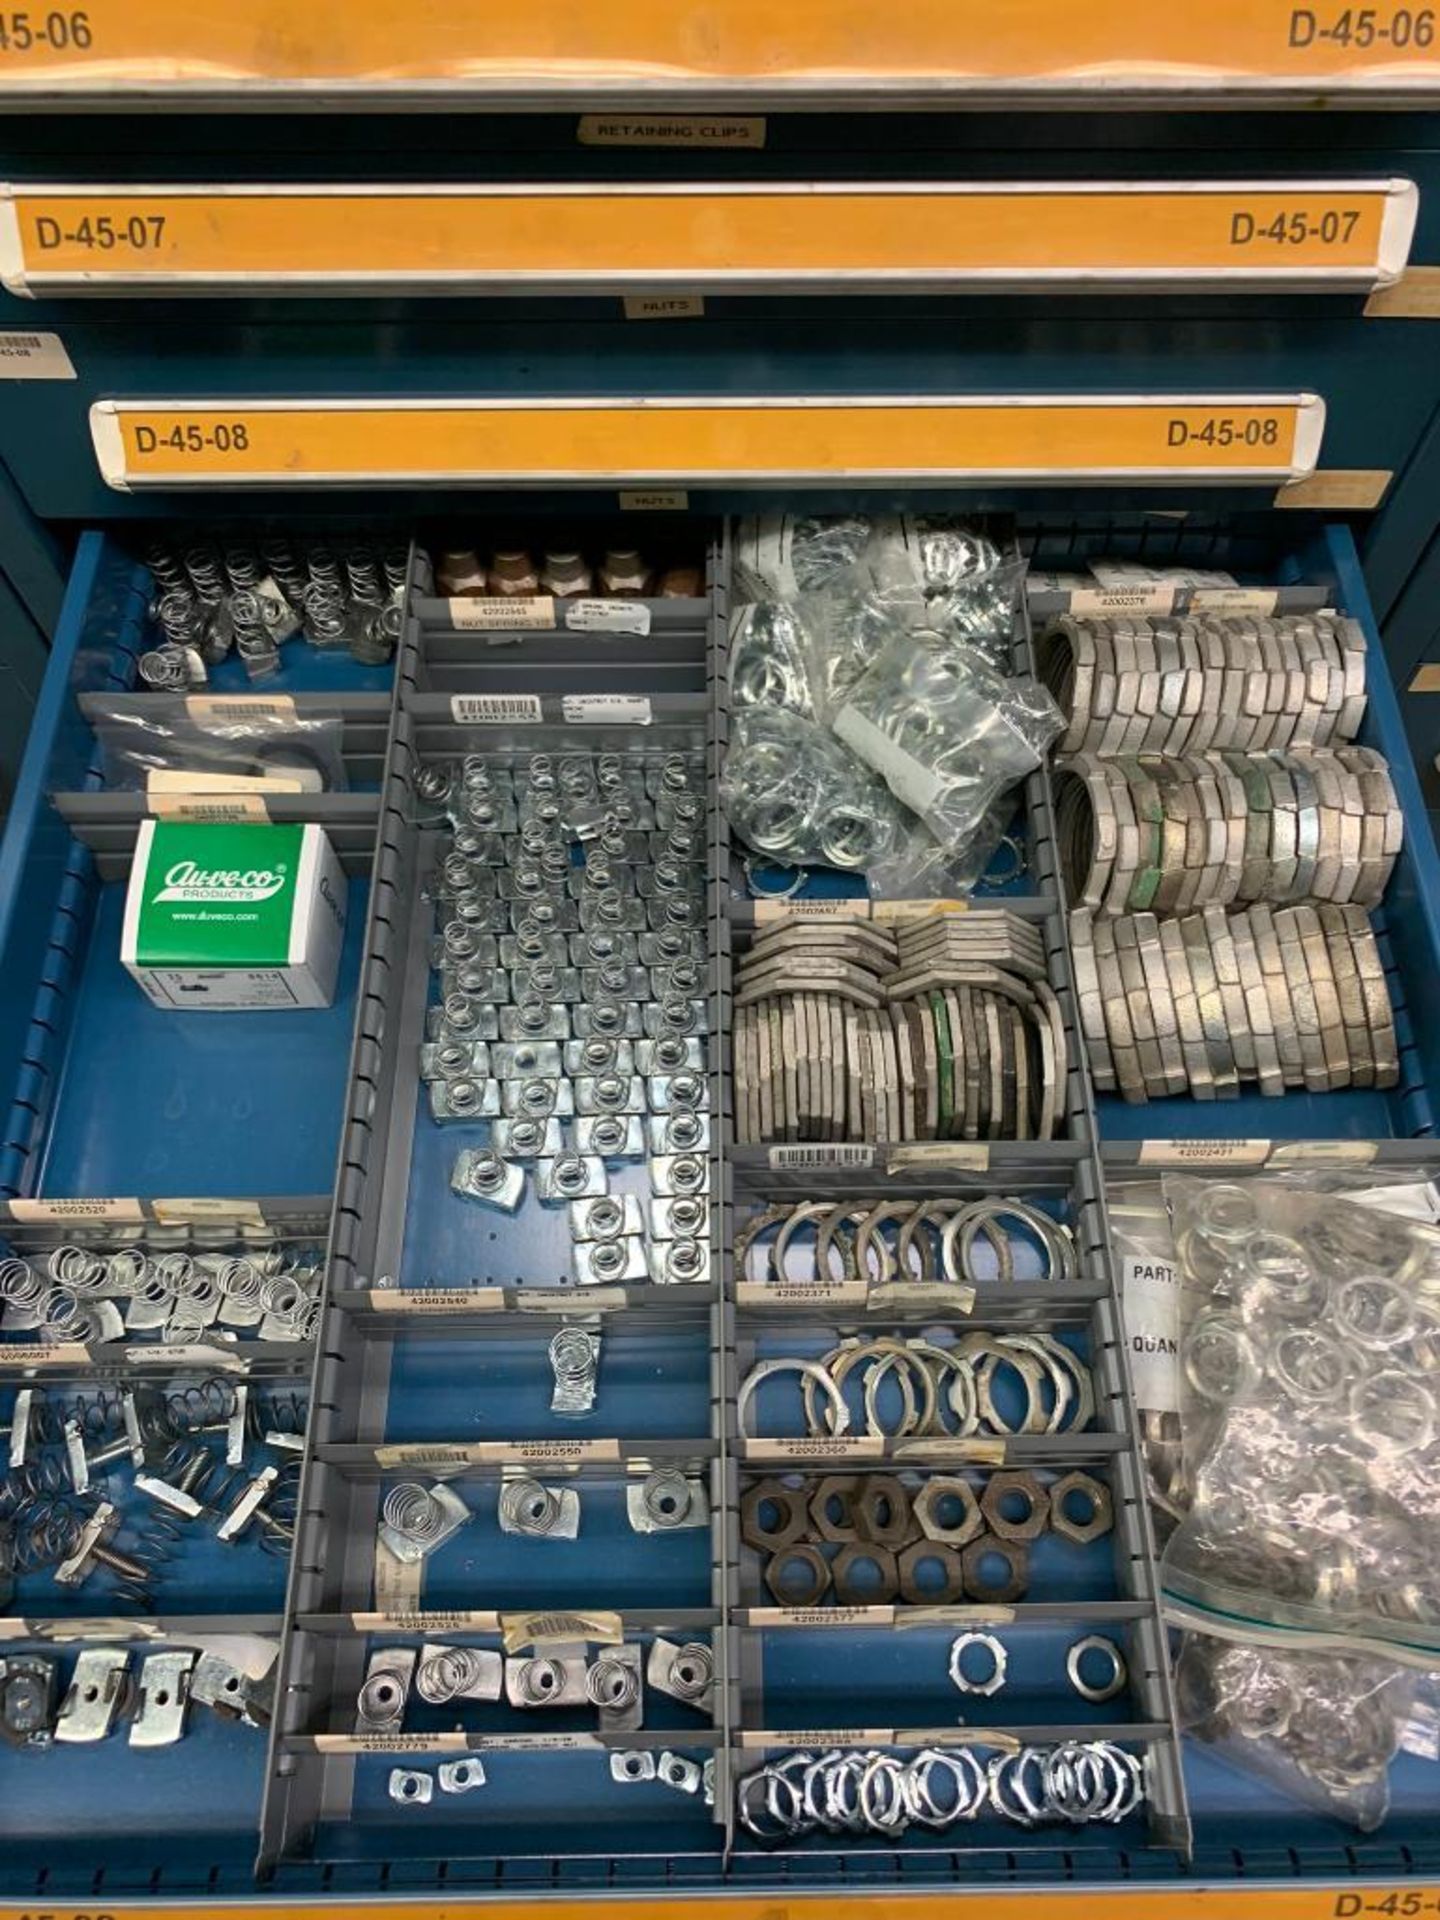 Vidmar 13-Drawer Cabinet w/ Assorted O-Rings, Retaining Clips, Nuts, Legend Plates, Concrete Anchors - Image 15 of 20